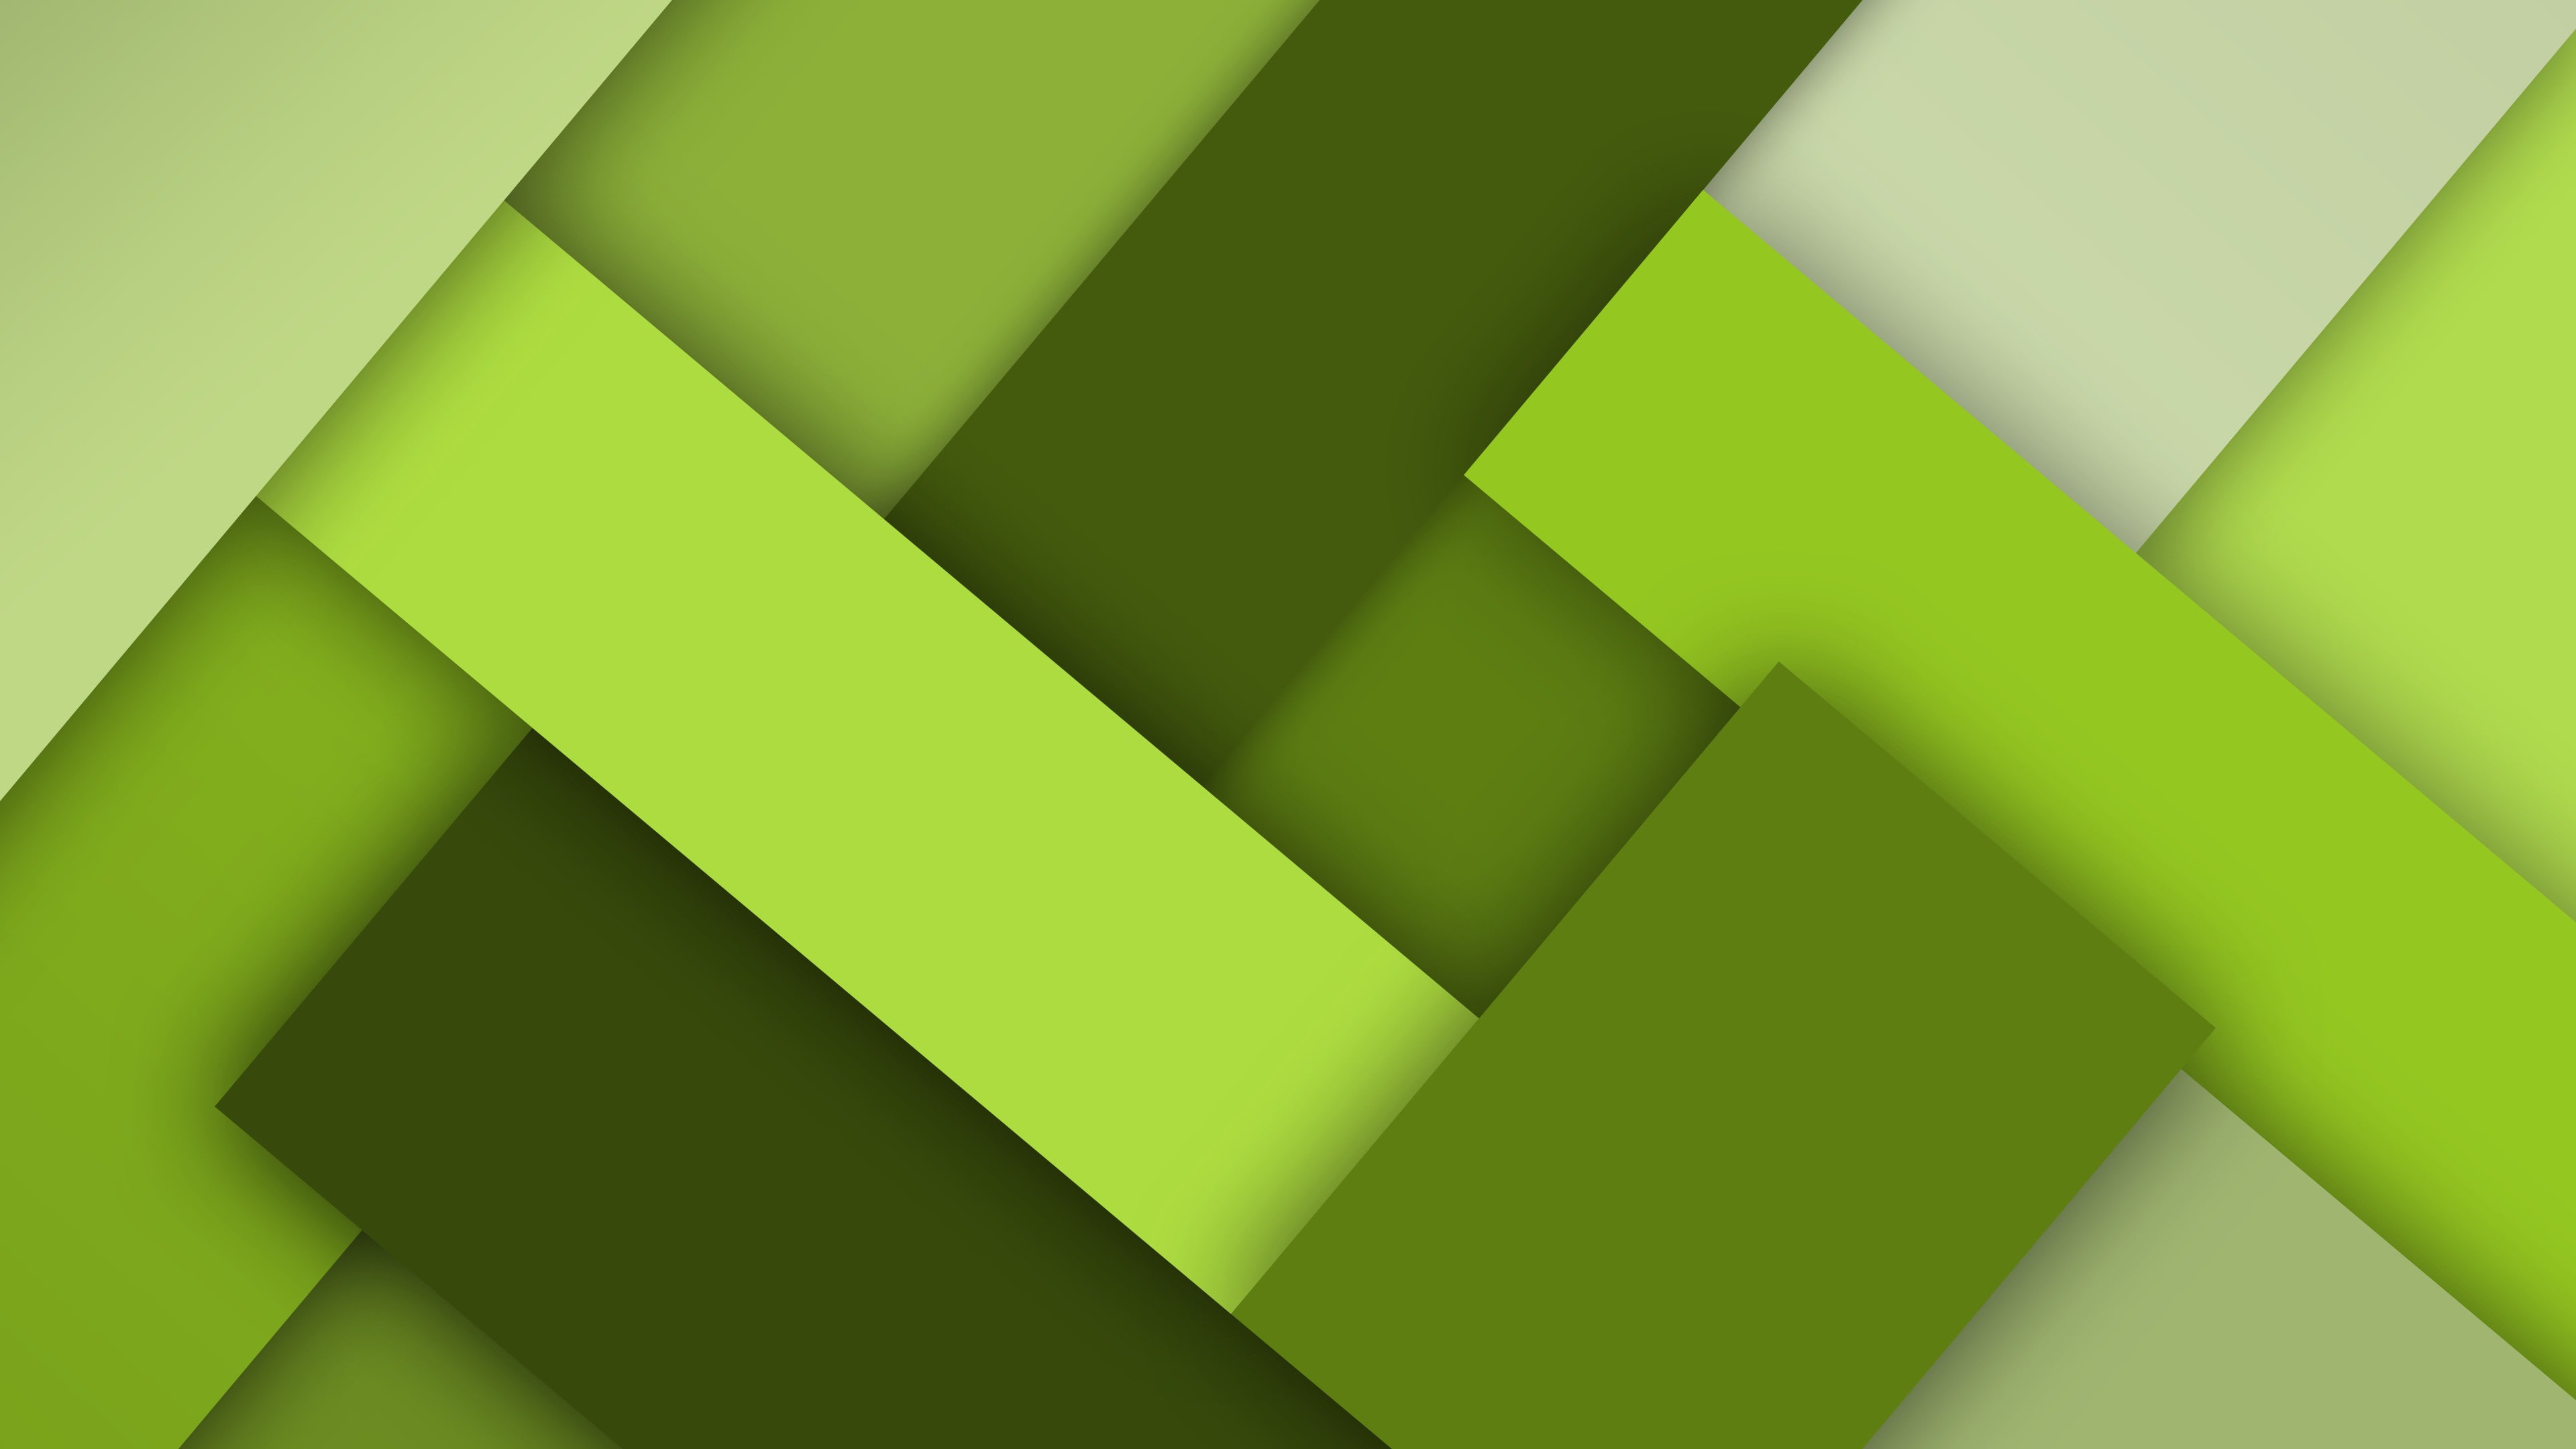 Green pattern, colors, squares, best, hd